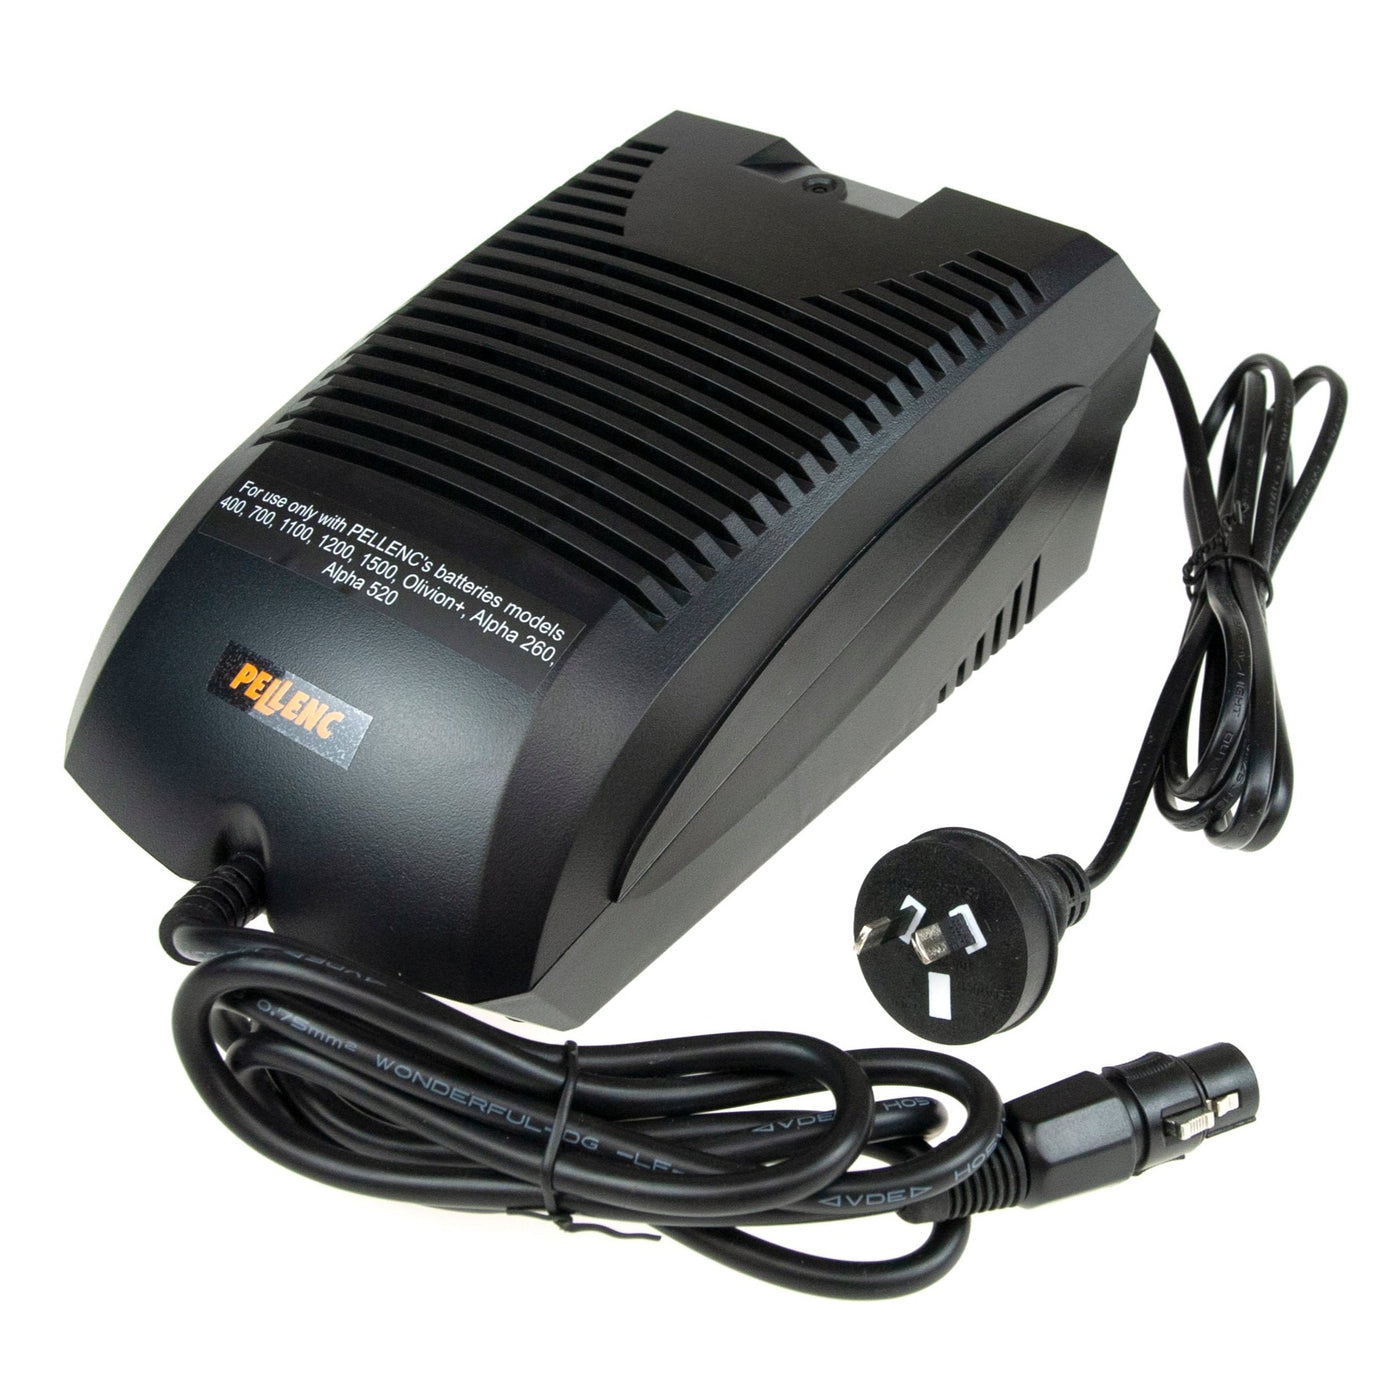 Pellenc 7.6A Universal Charger